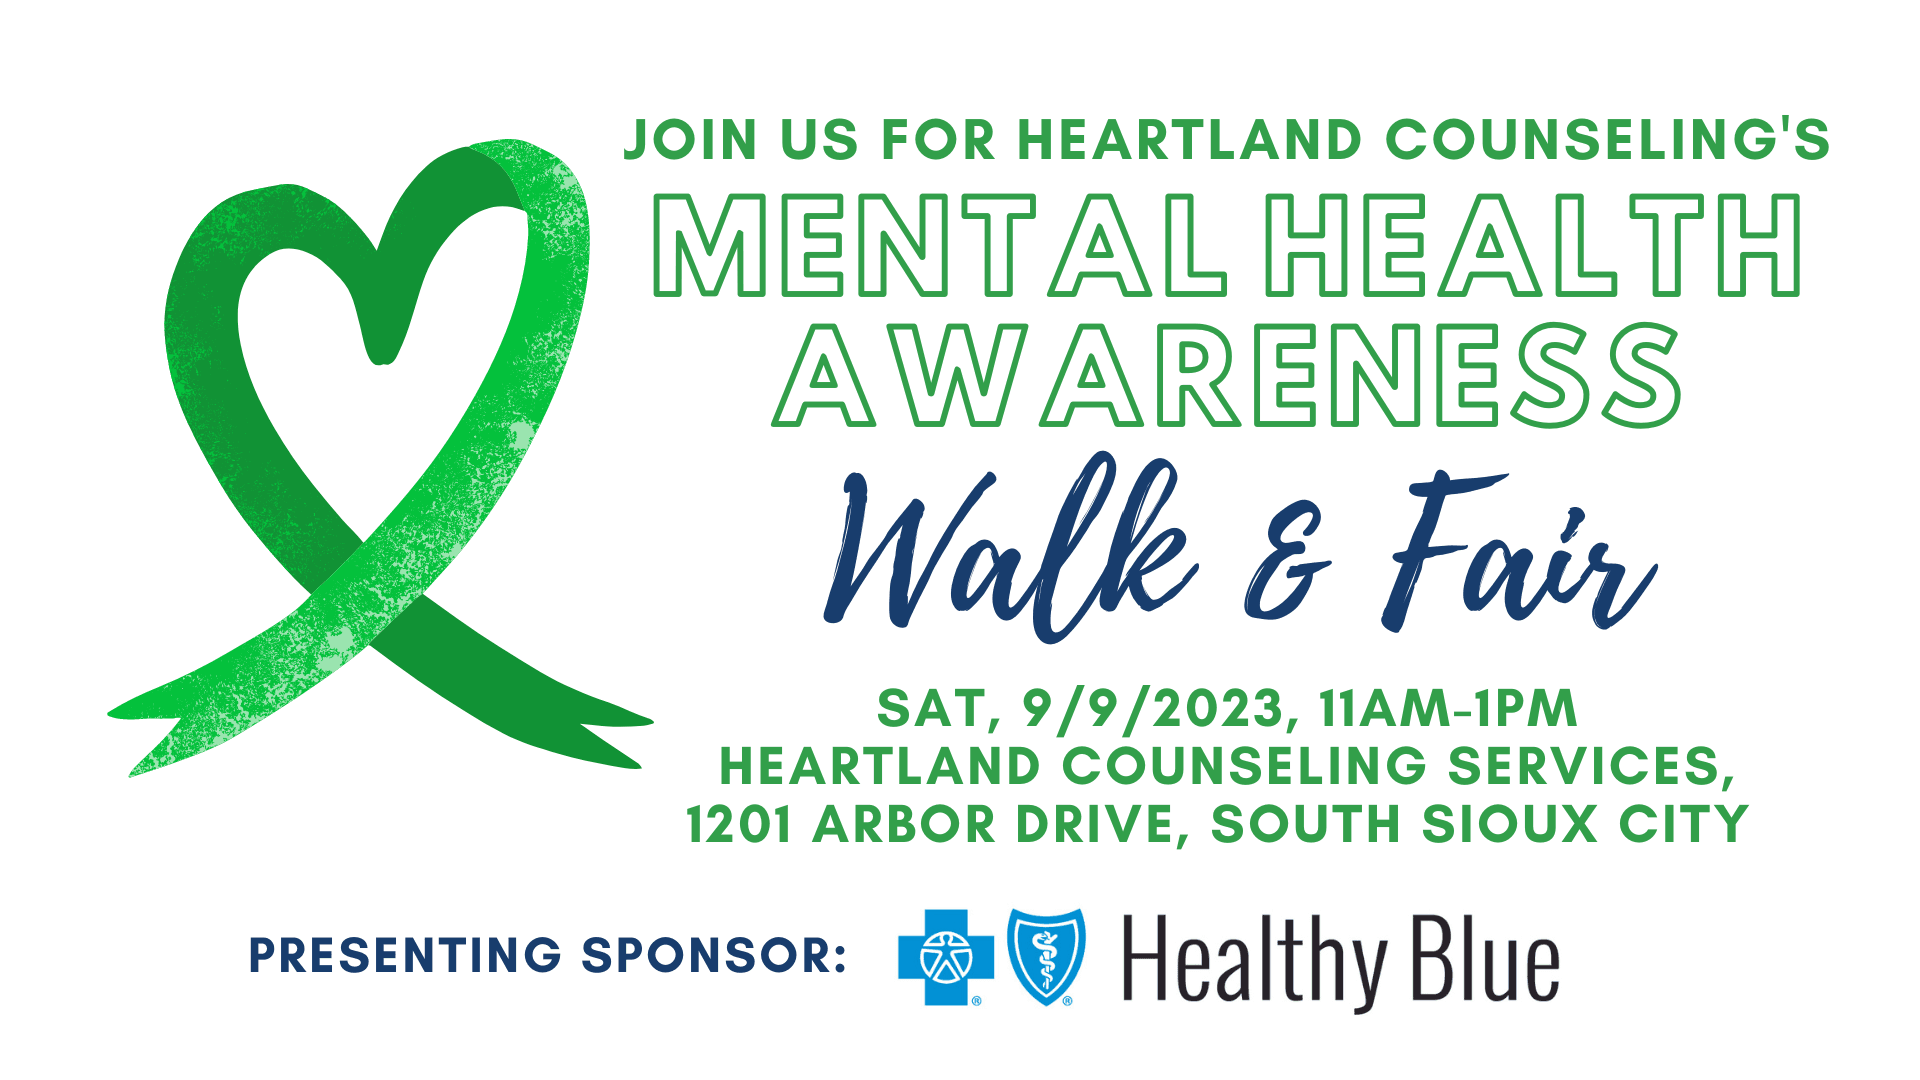 Heartland Counseling & Healthy Blue Partner to Raise Awareness of Mental Health Services and Substance Abuse Recovery Month with Walk & Fair!